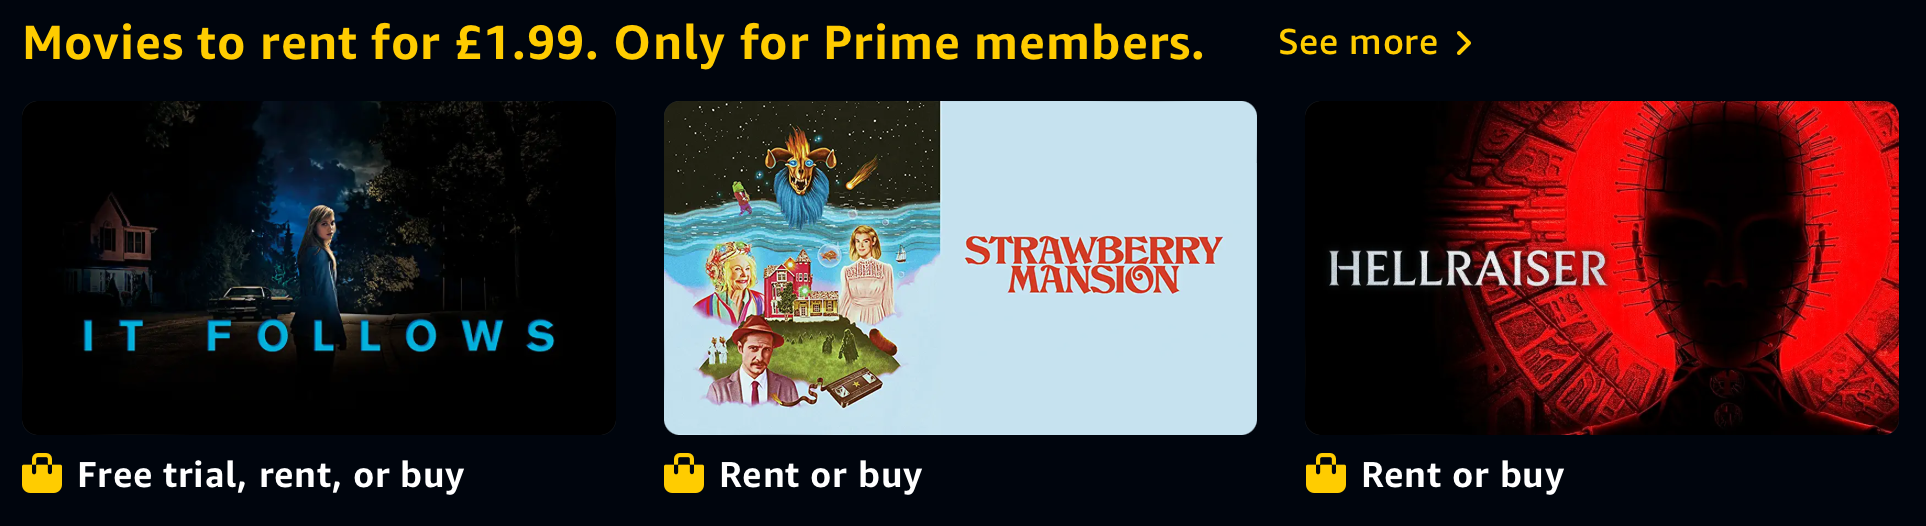 1.99 Prime Members Only rental prices.